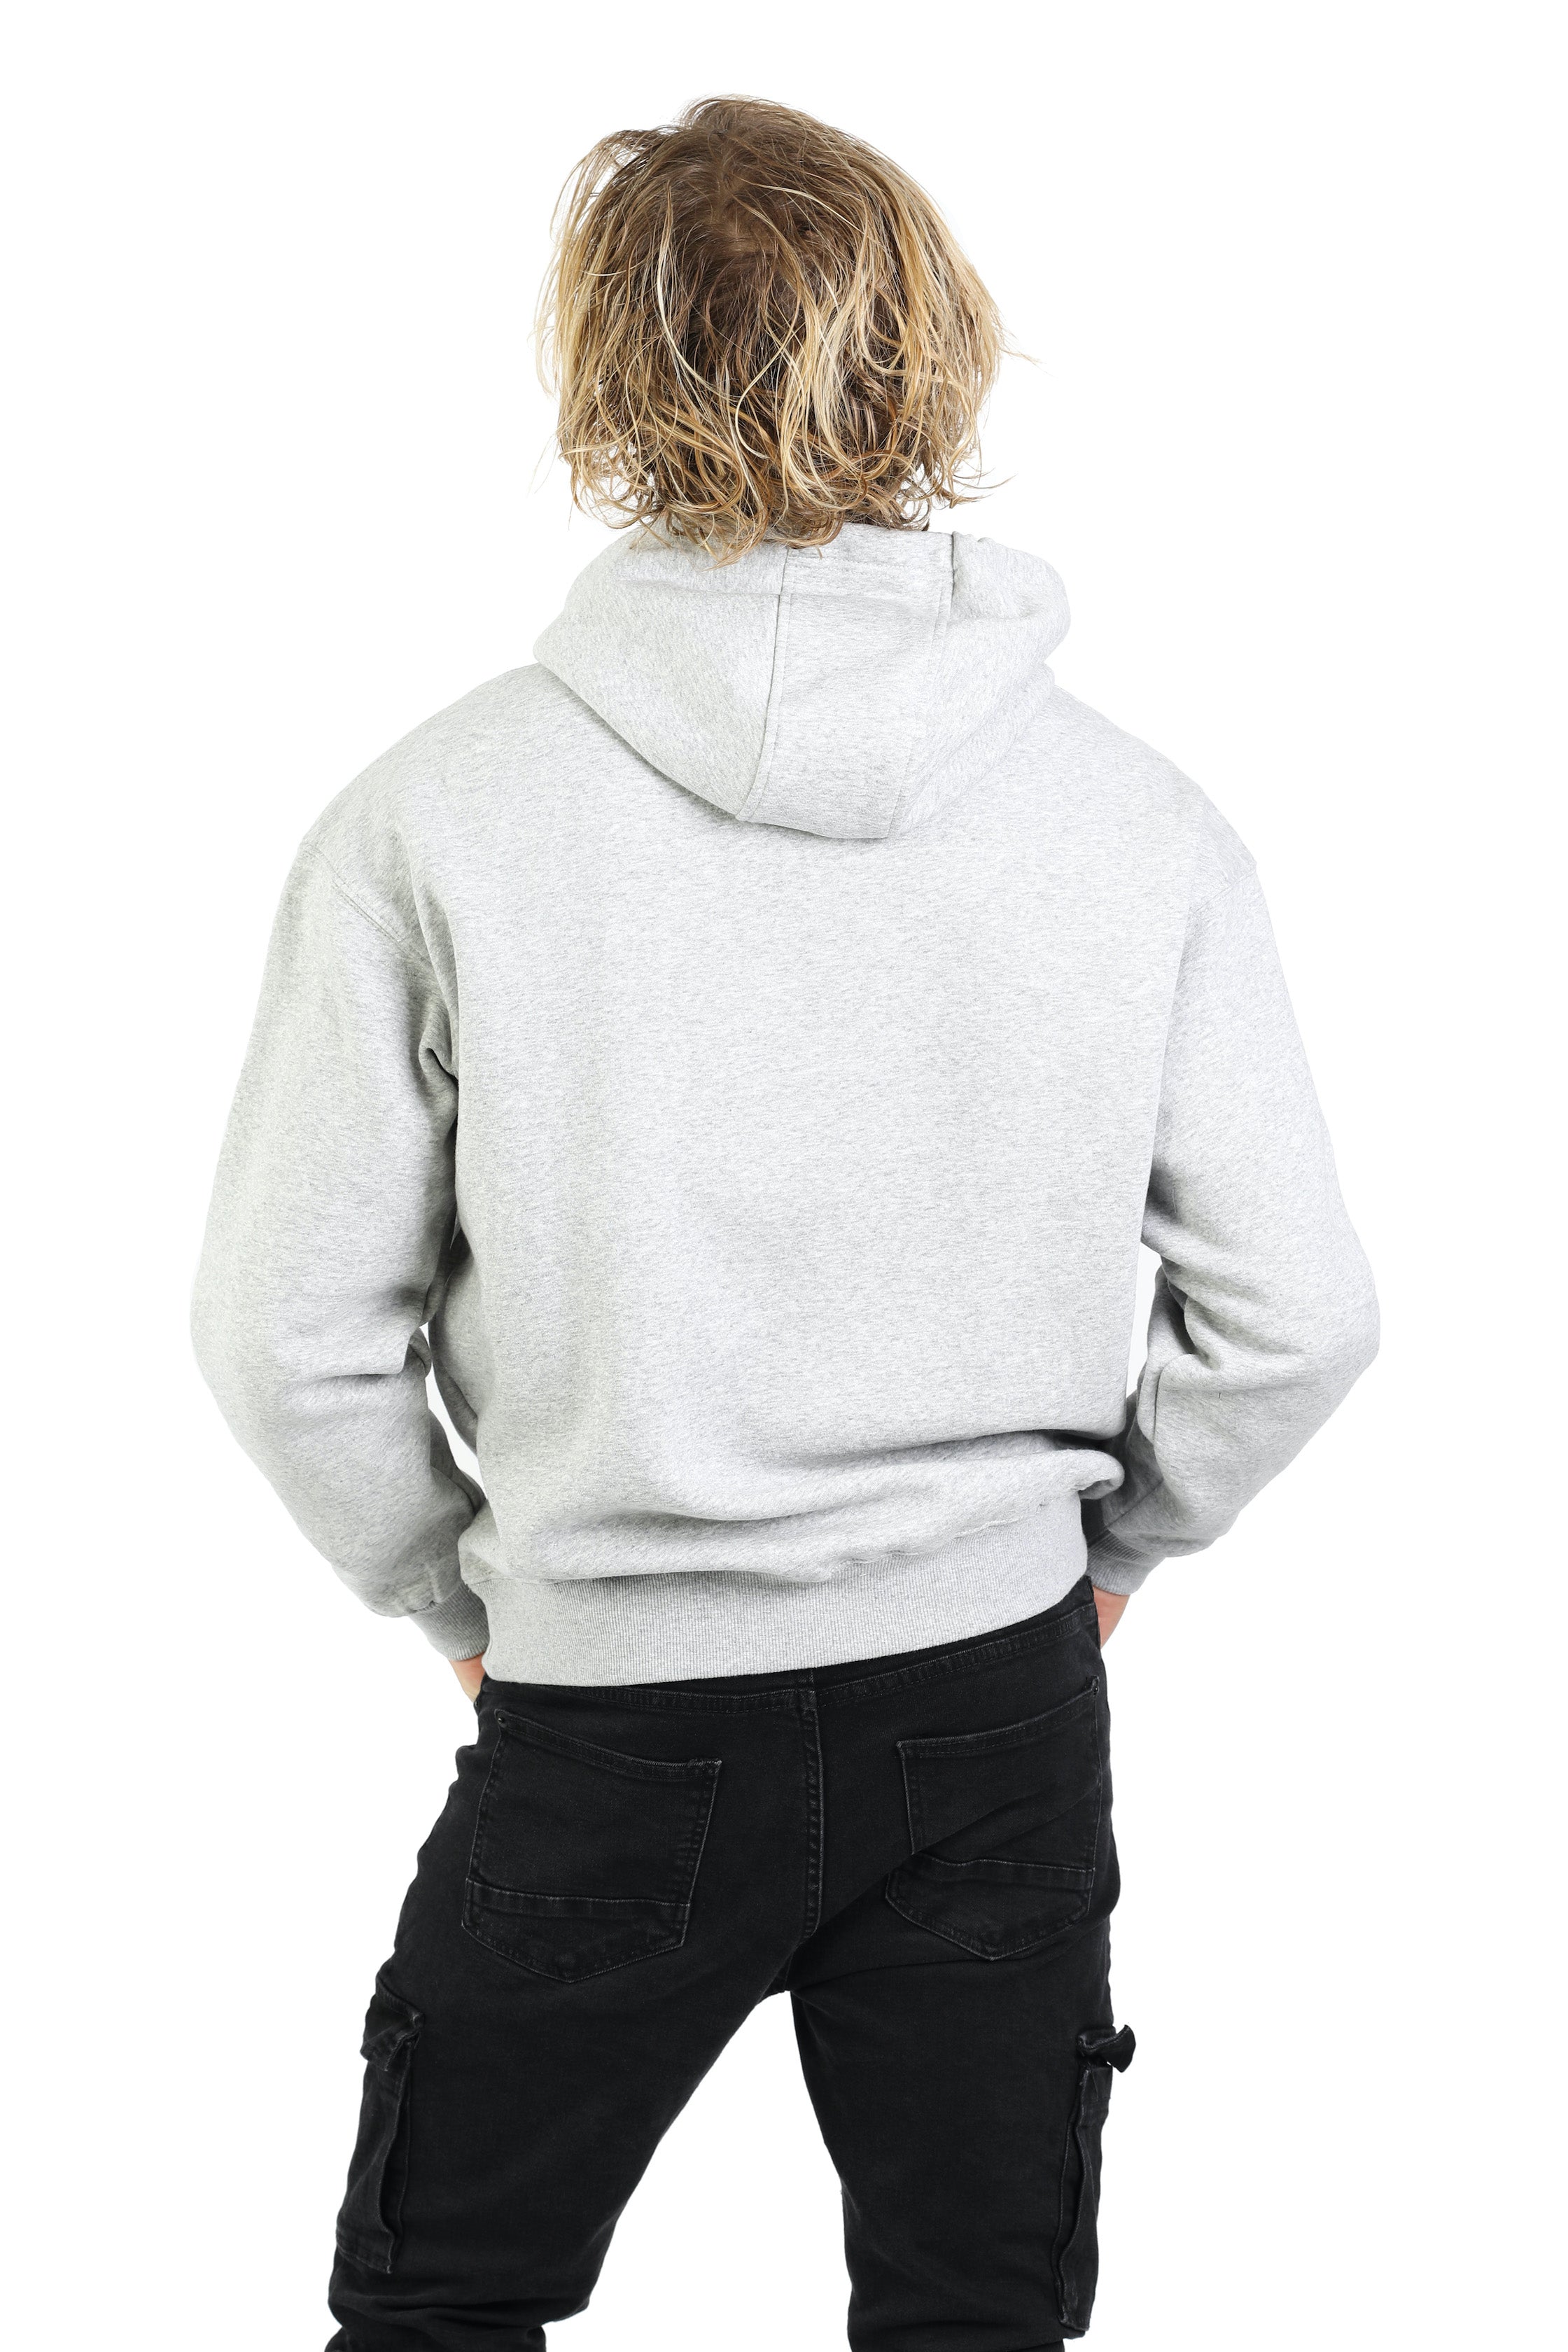 Cheeky relaxed hoodie in classic grey